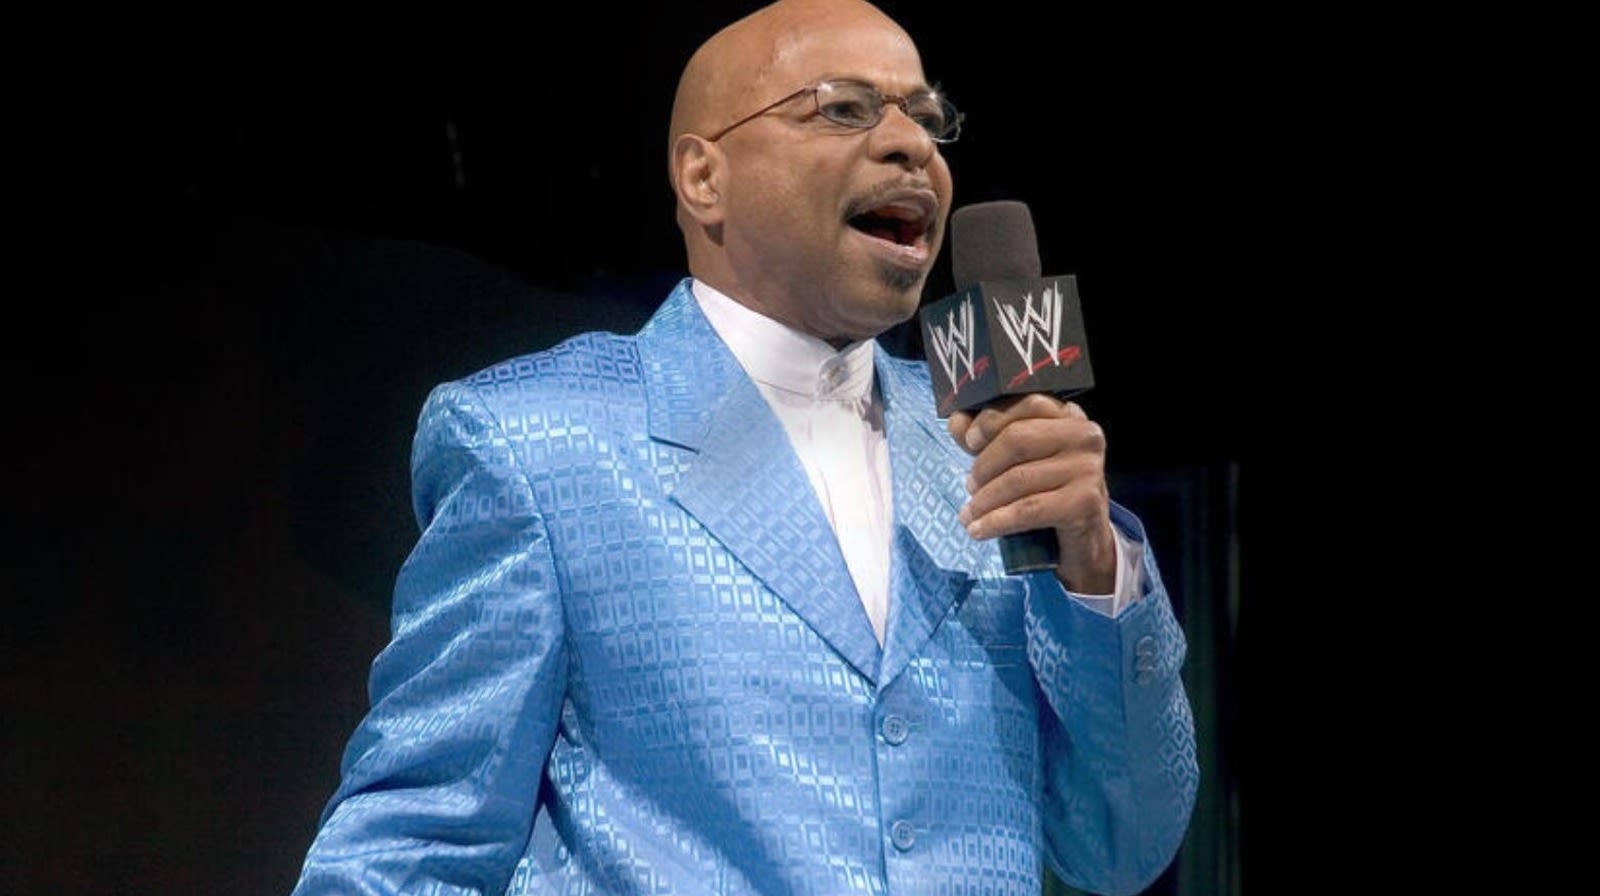 WWE Hall Of Famer Teddy Long On Genesis Of His Catchphrase, Signature Dance - Wrestling Inc.